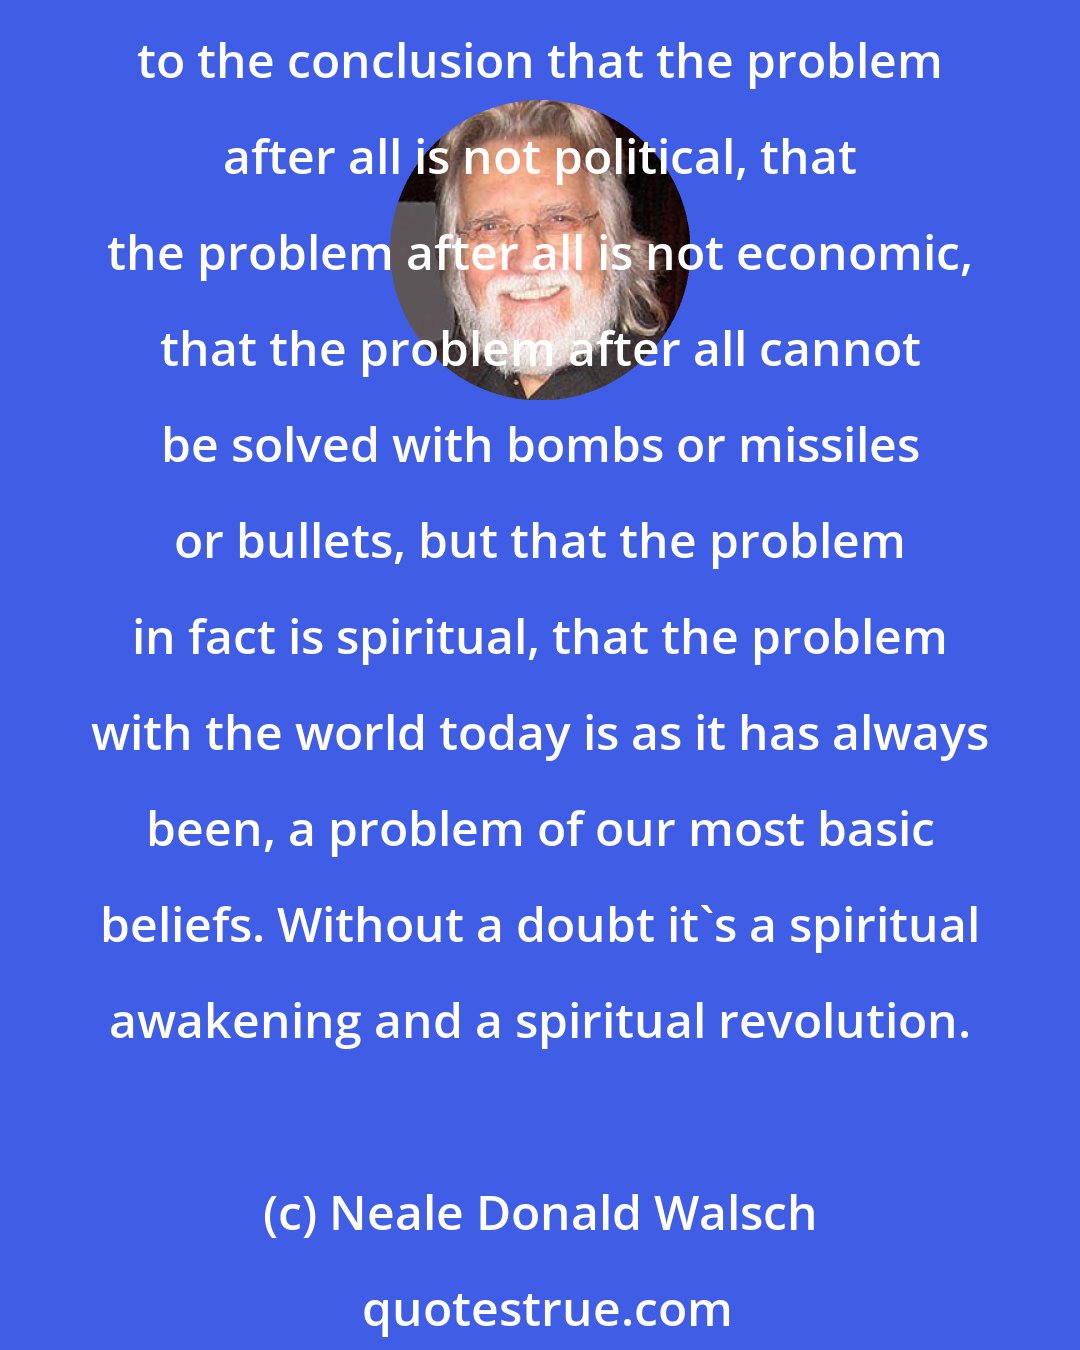 Neale Donald Walsch: Something is amiss, deeply wrong, something is deeply wrong with the way we're living our lives collectively, with the way we are creating our collective experience on earth. And we are coming to the conclusion that the problem after all is not political, that the problem after all is not economic, that the problem after all cannot be solved with bombs or missiles or bullets, but that the problem in fact is spiritual, that the problem with the world today is as it has always been, a problem of our most basic beliefs. Without a doubt it`s a spiritual awakening and a spiritual revolution.